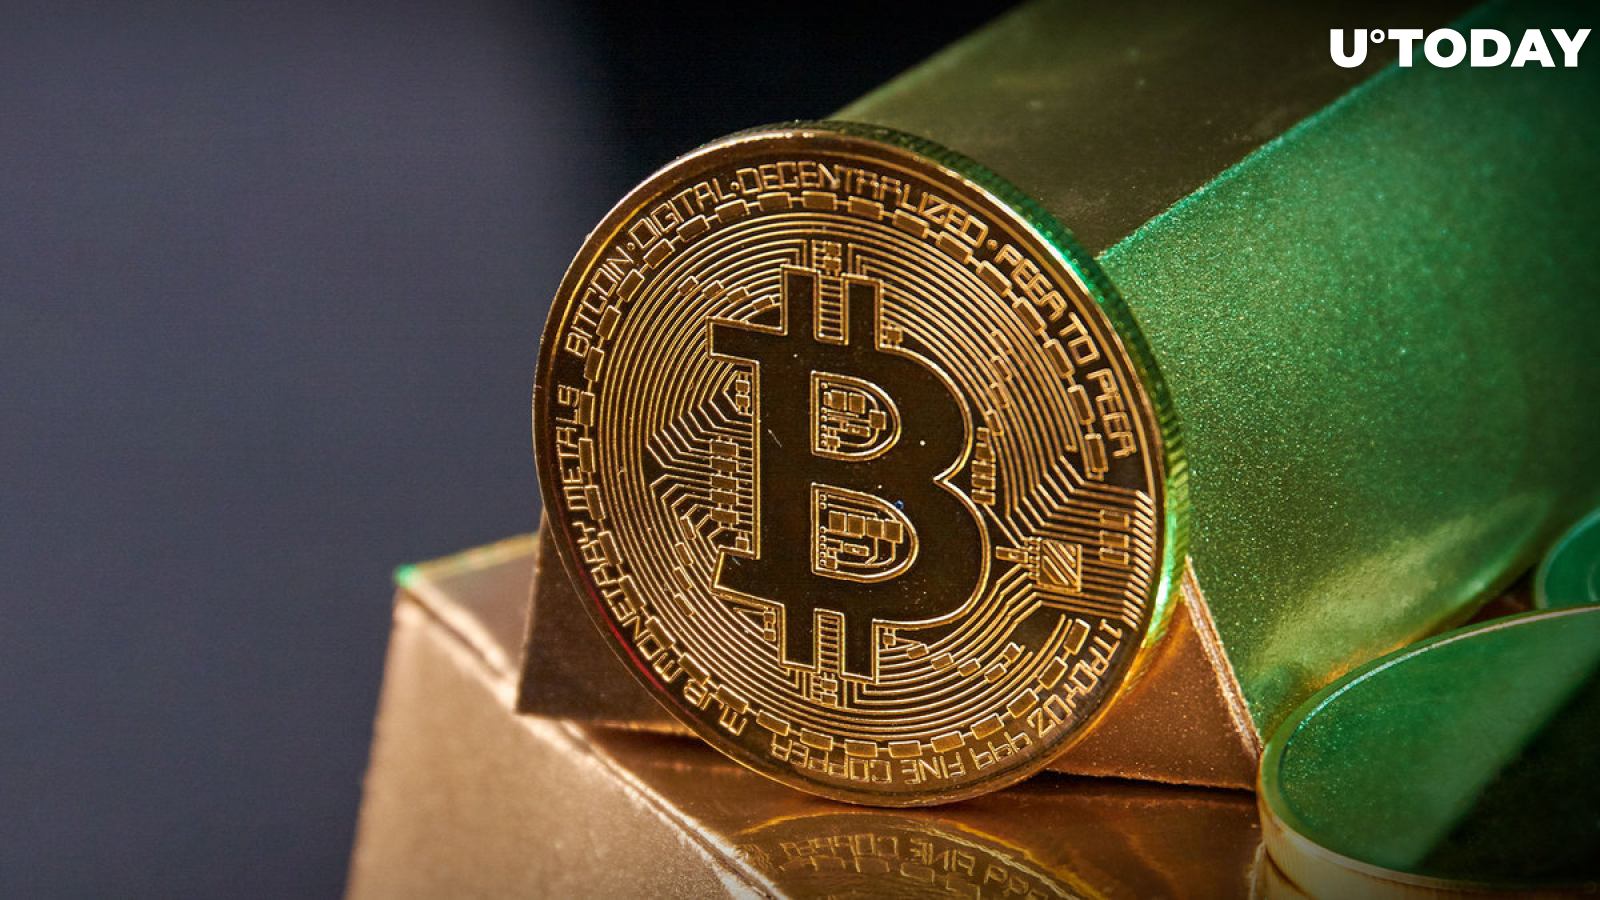 Bitcoin Price to 0,000: Analyst Sees BTC Outperforming Gold in Long Term